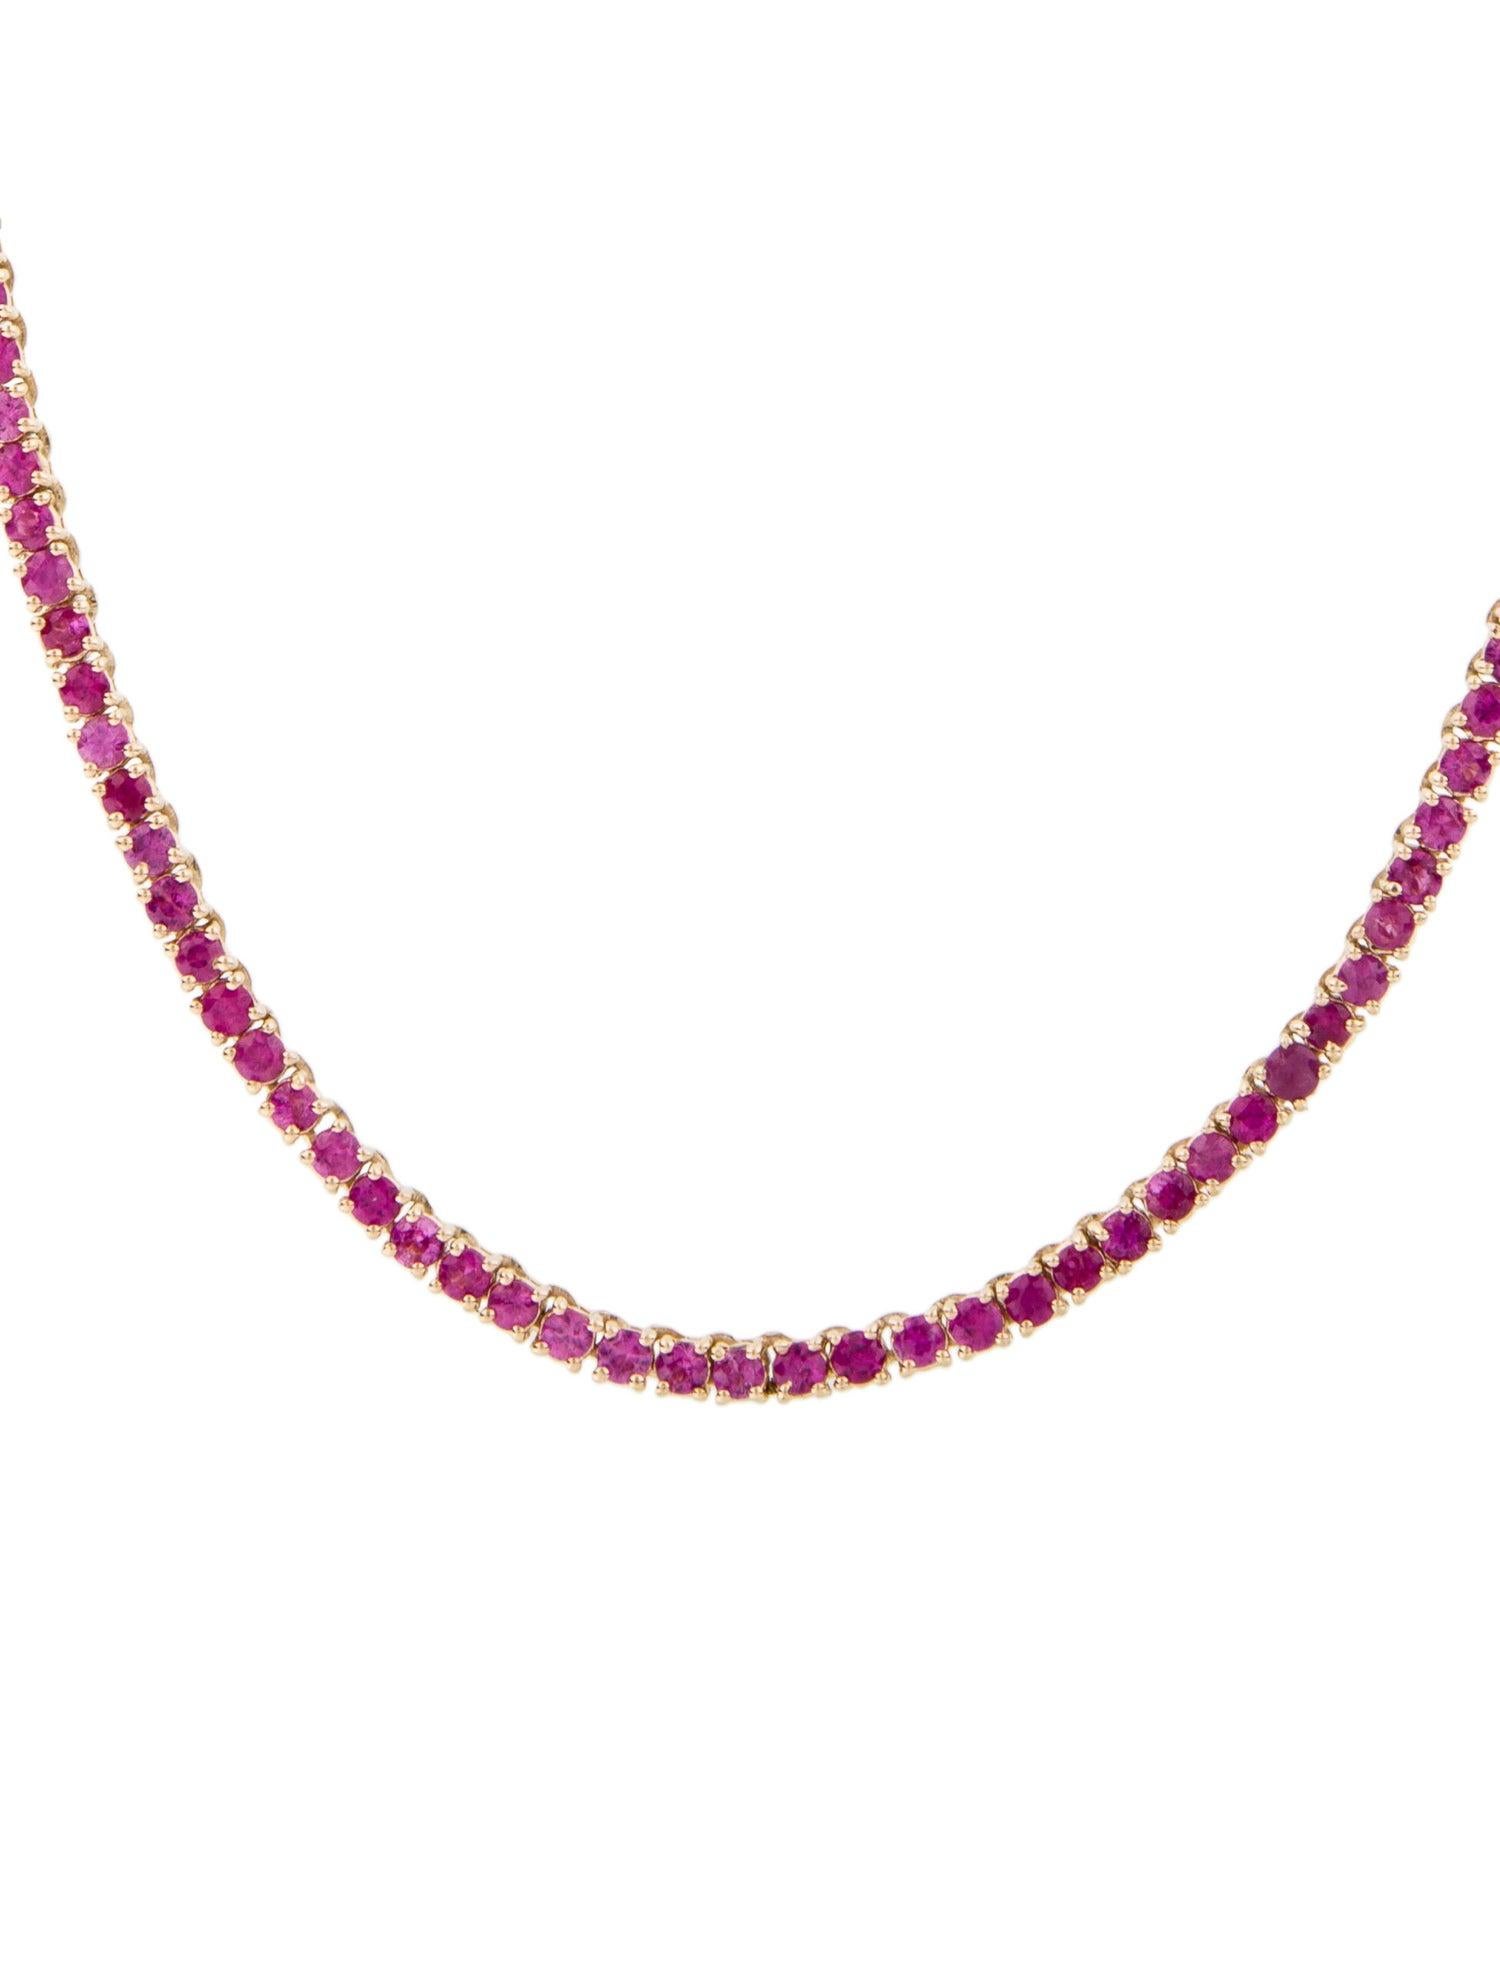 Brilliant Cut 14K Ruby Chain Necklace 12.15ctw - Exquisite Jewelry Piece for Glamorous Style For Sale